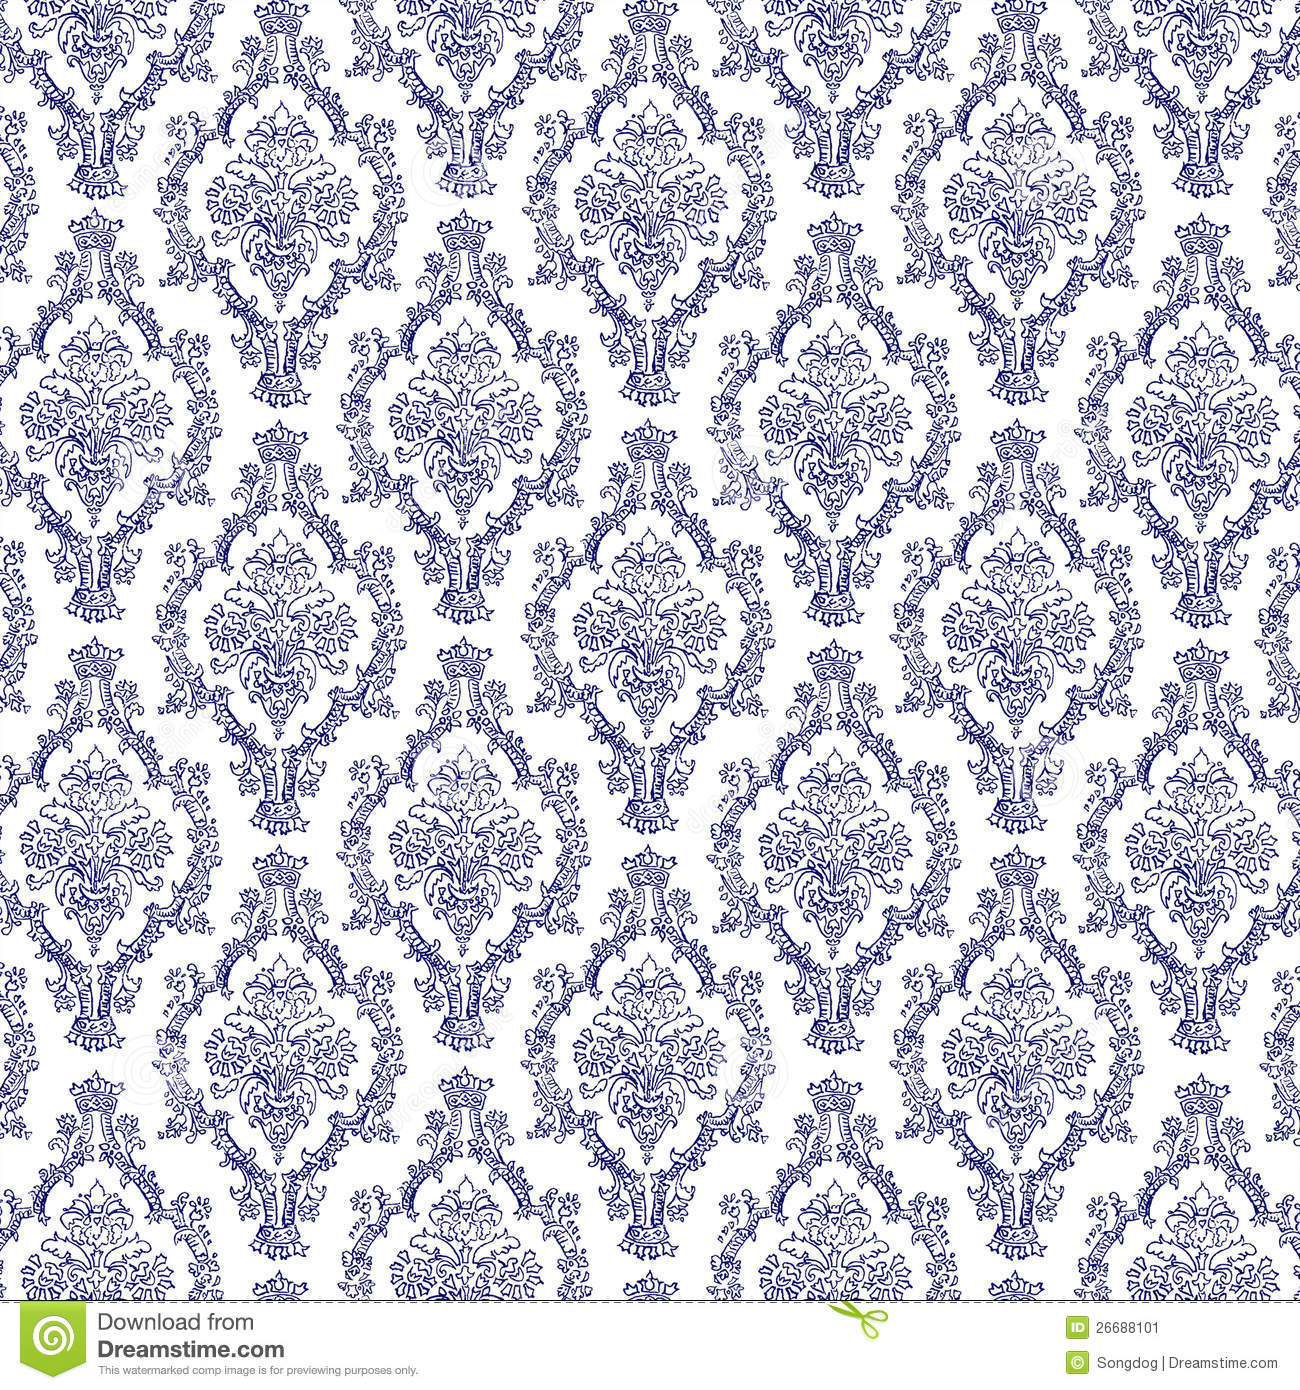 Navy Blue Damask Wallpaper For Walls Image Pictures Becuo